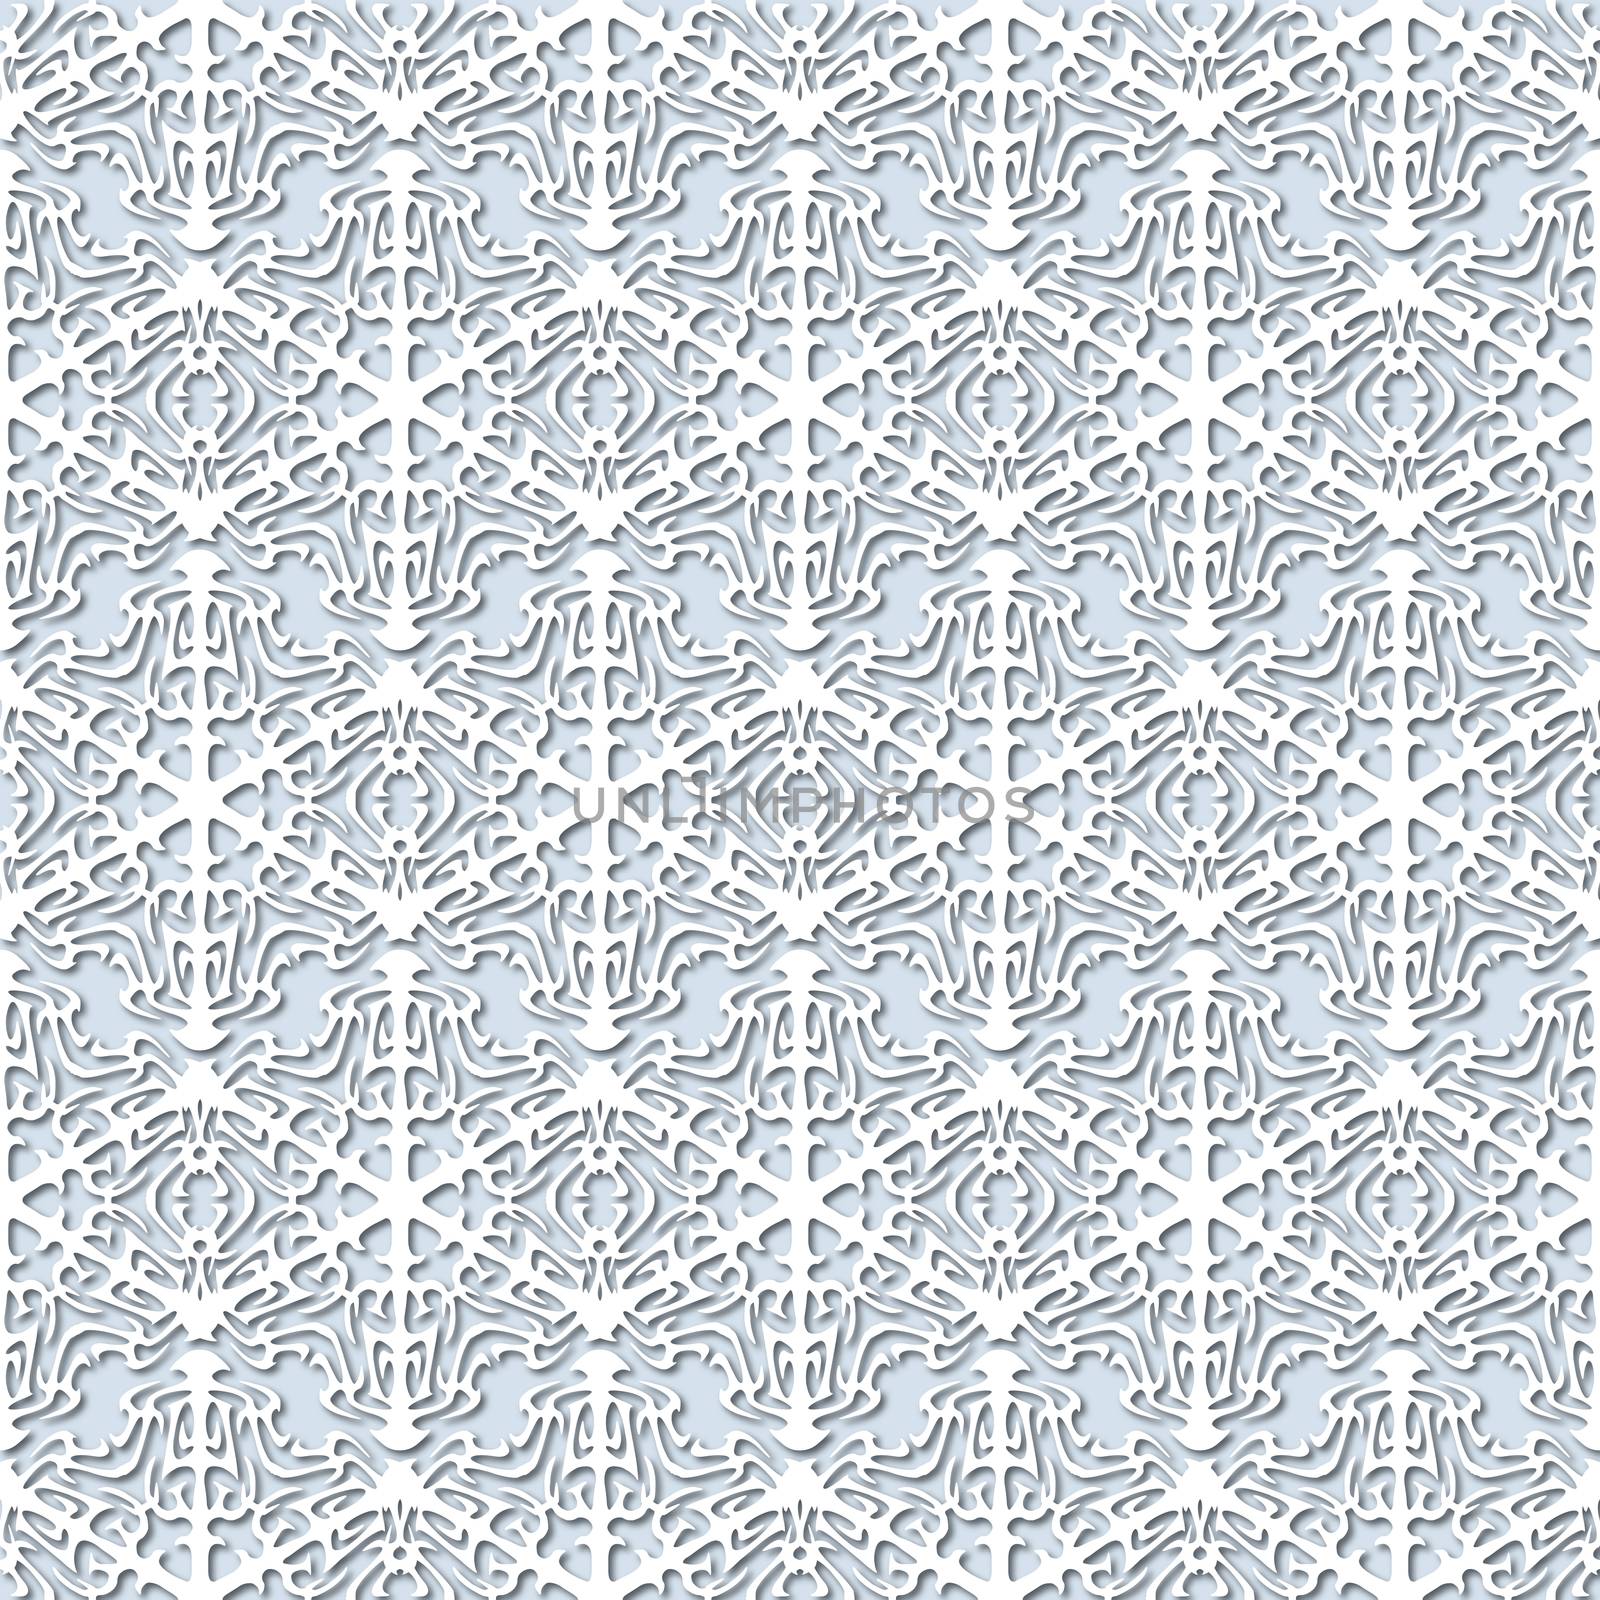 White snowflakes on pale blue background, damask ornament seamless pattern. Paper cut style by Pashchenko